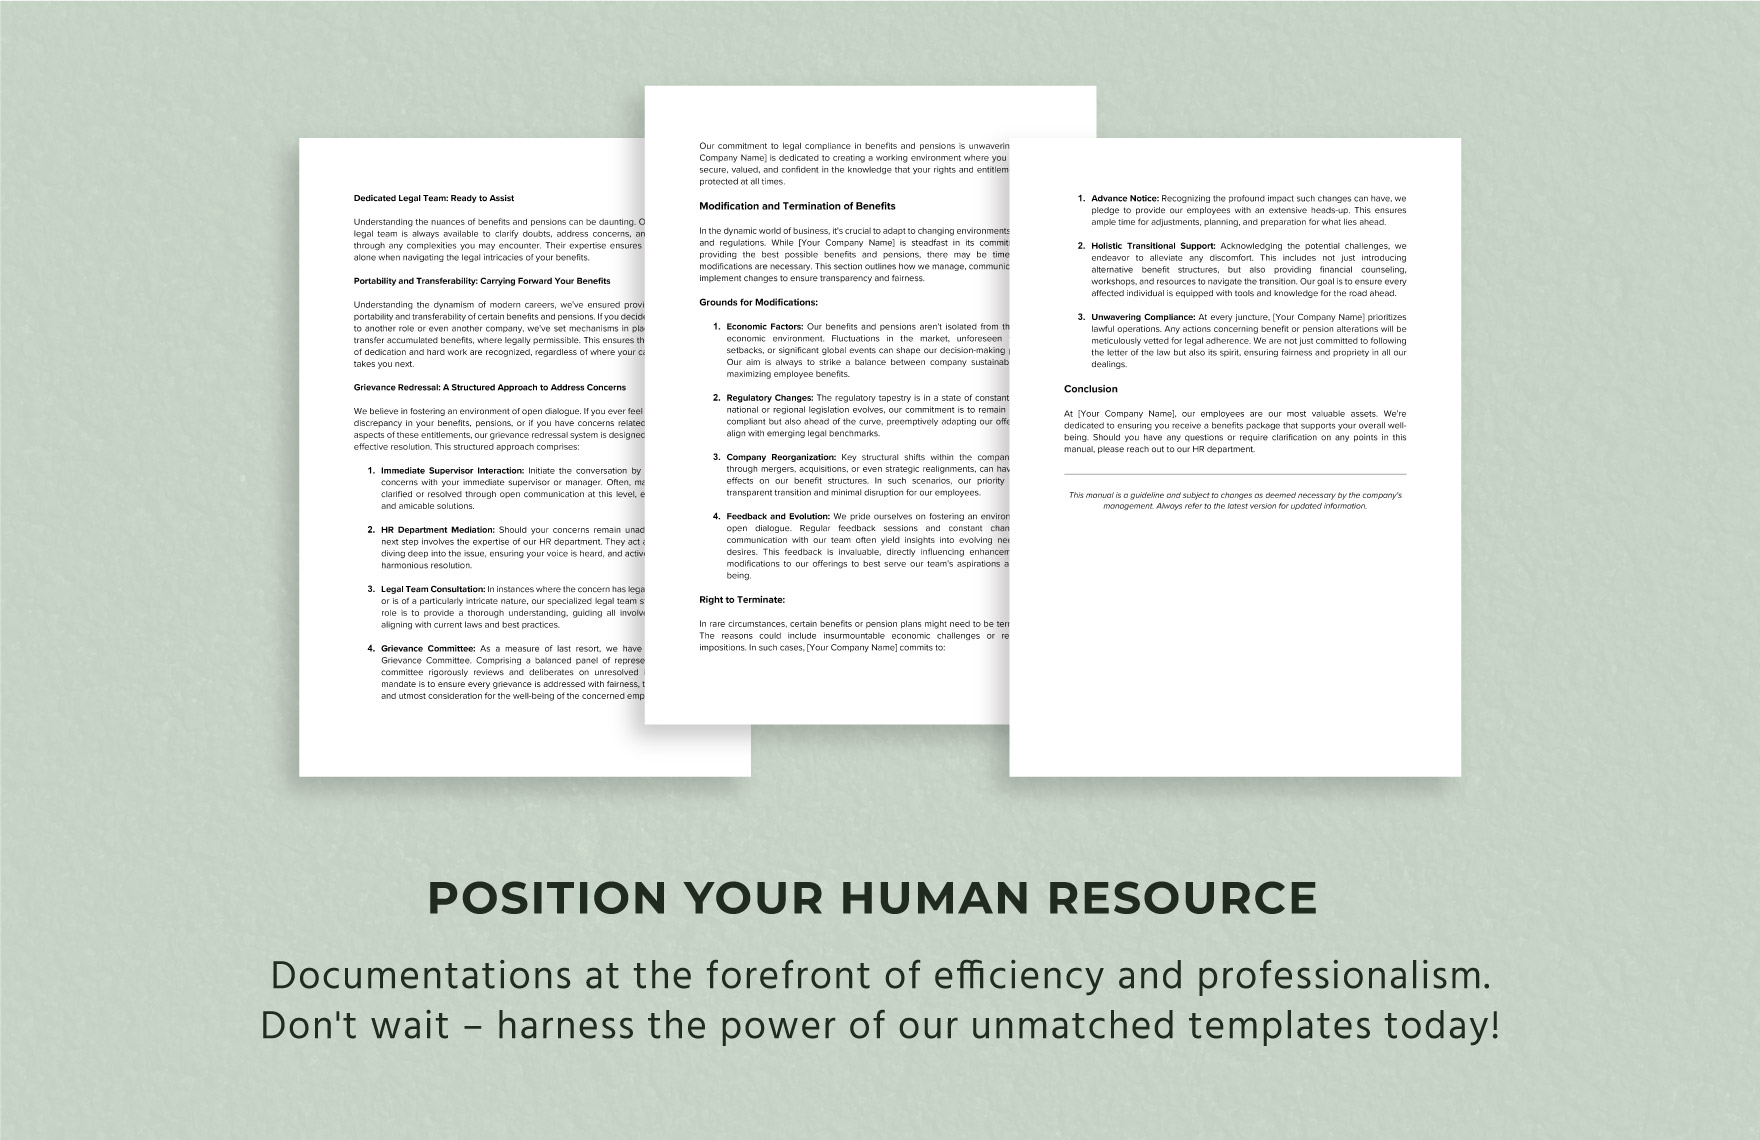 Employee Benefits, Pensions, and Legal Aspects Manual HR Template